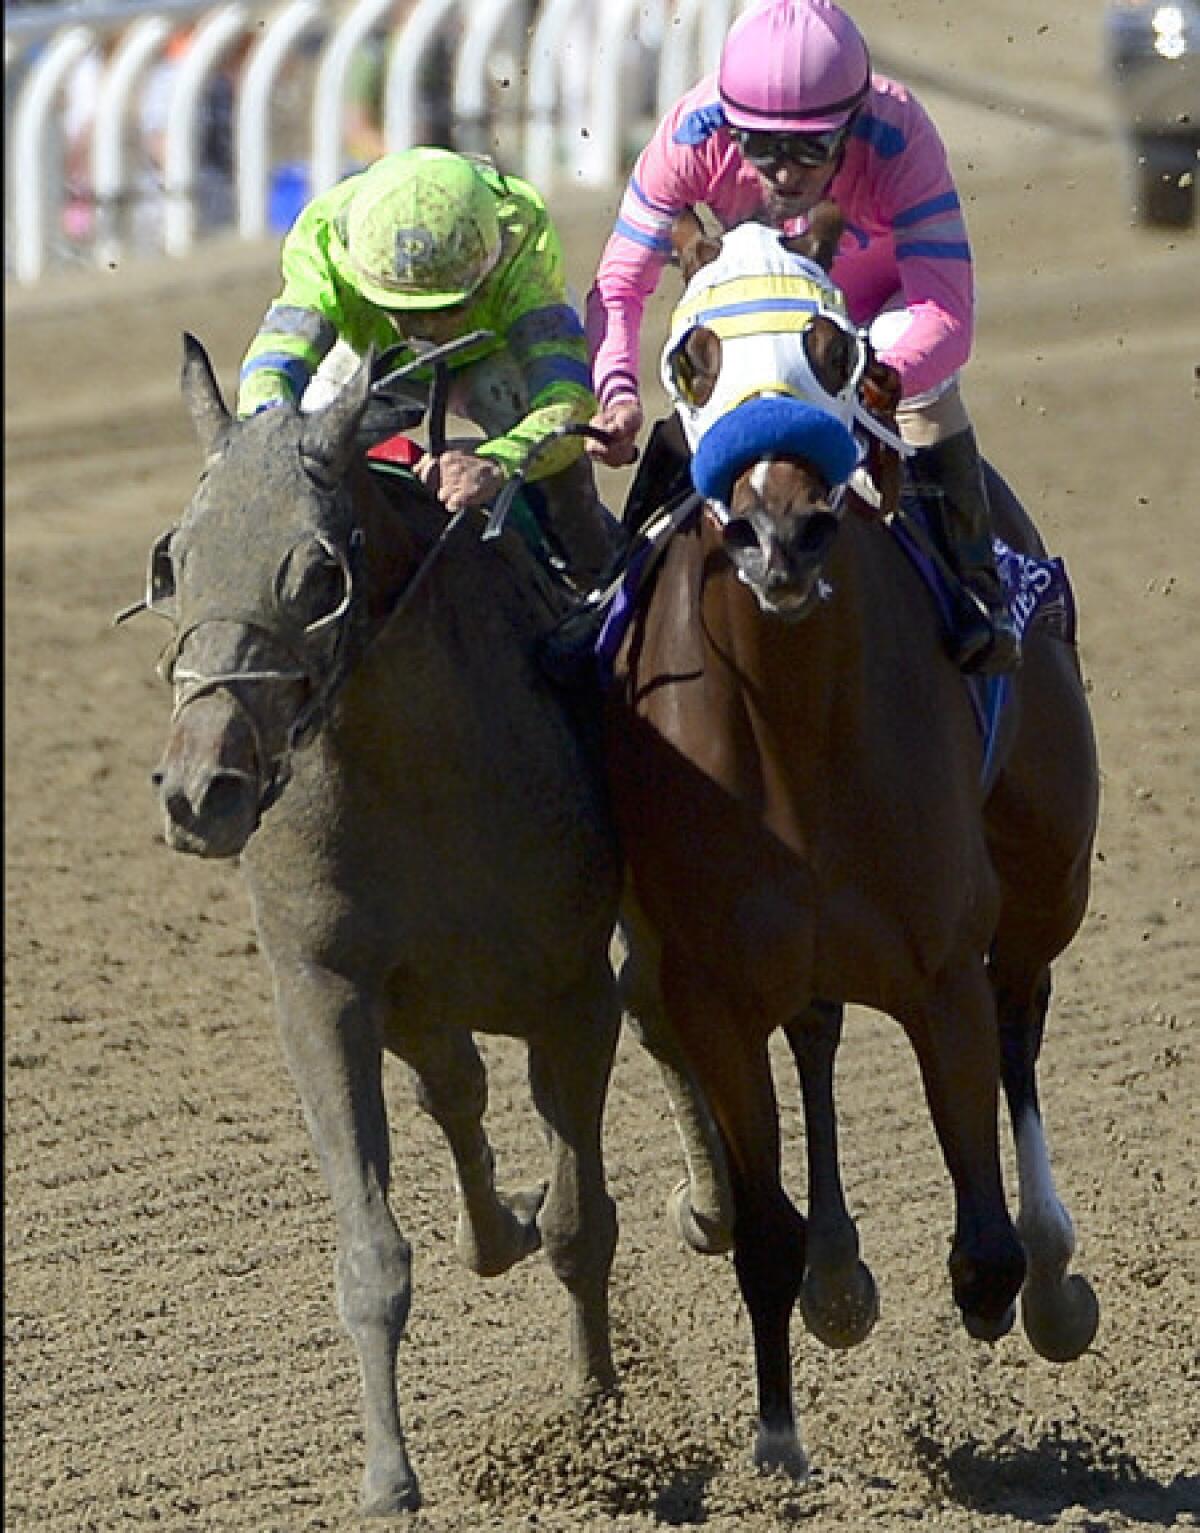 Ria Antonia, left, with jockey Javier Castellano aboard, drives down the stretch against She's a Tiger and jockey Gary Stevens in the Breeders' Cup Juvenile Fillies race on Saturday at Santa Anita Park.